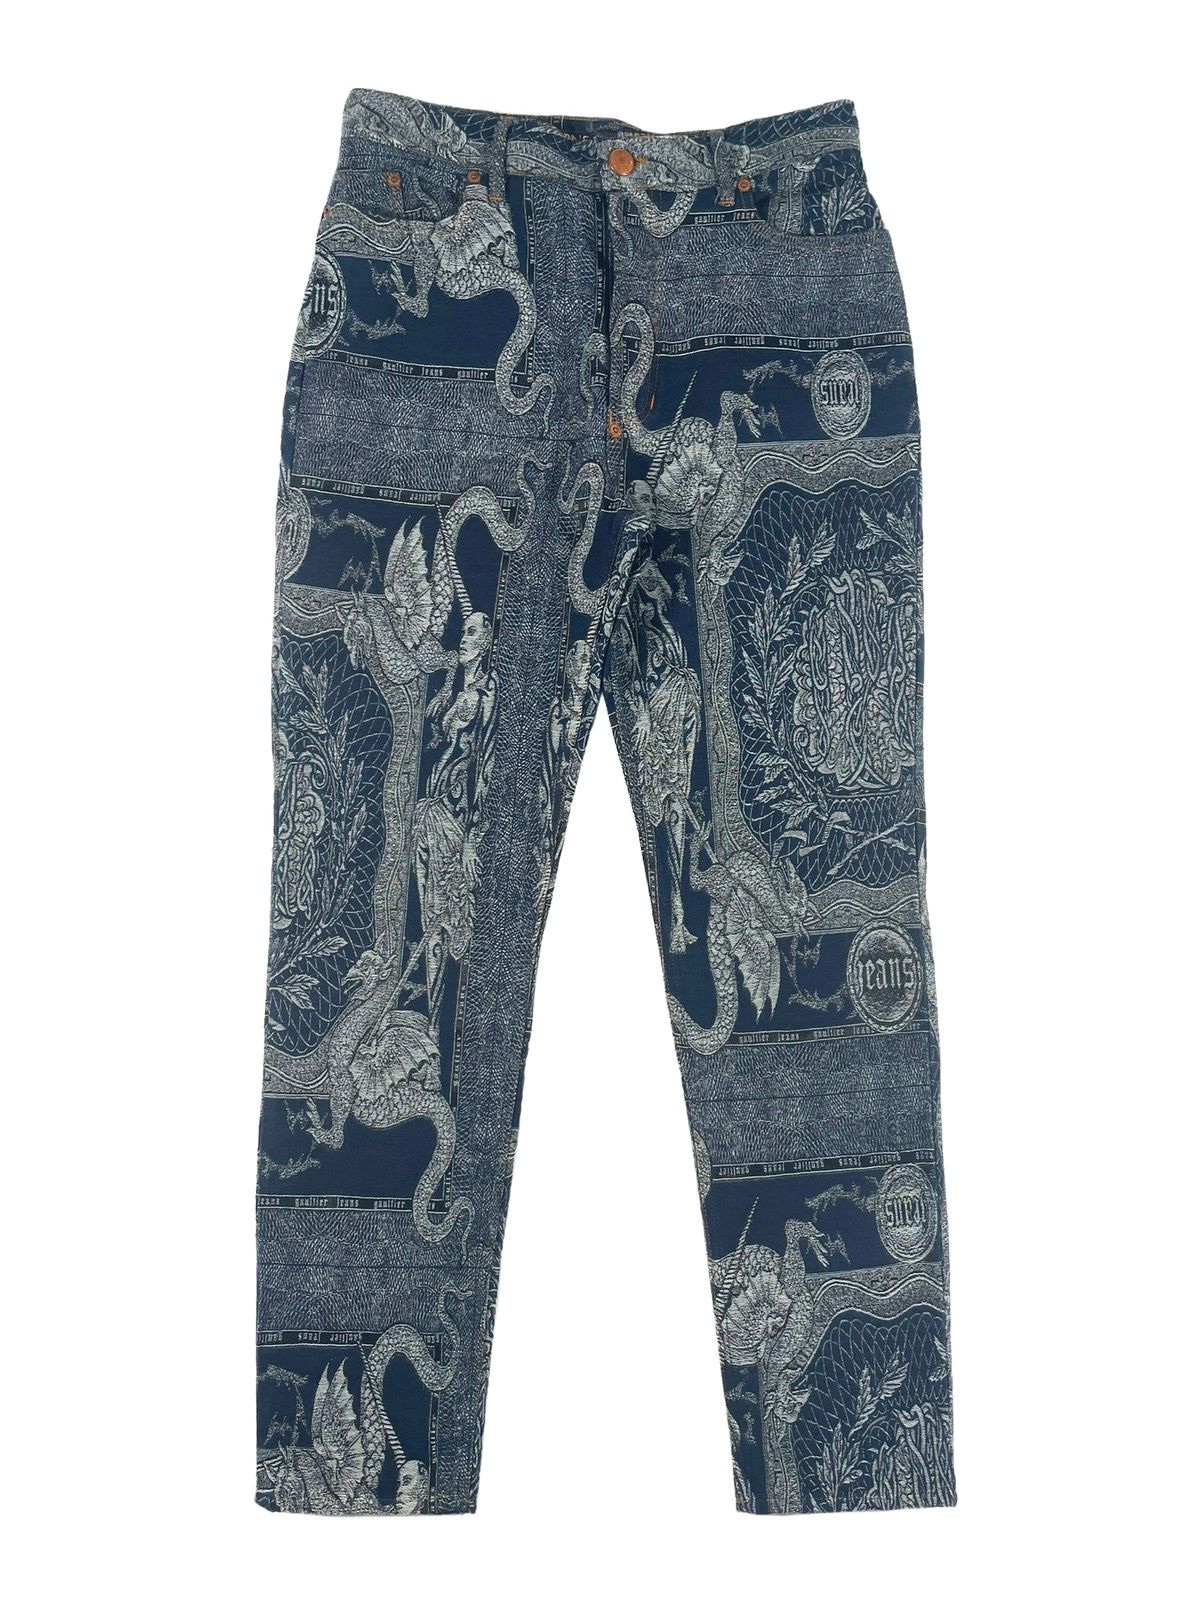 Pre-owned Jean Paul Gaultier Fw94 Dragon Slayer Jacquard Tattoo Denim Pant Jeans Archive In Blue